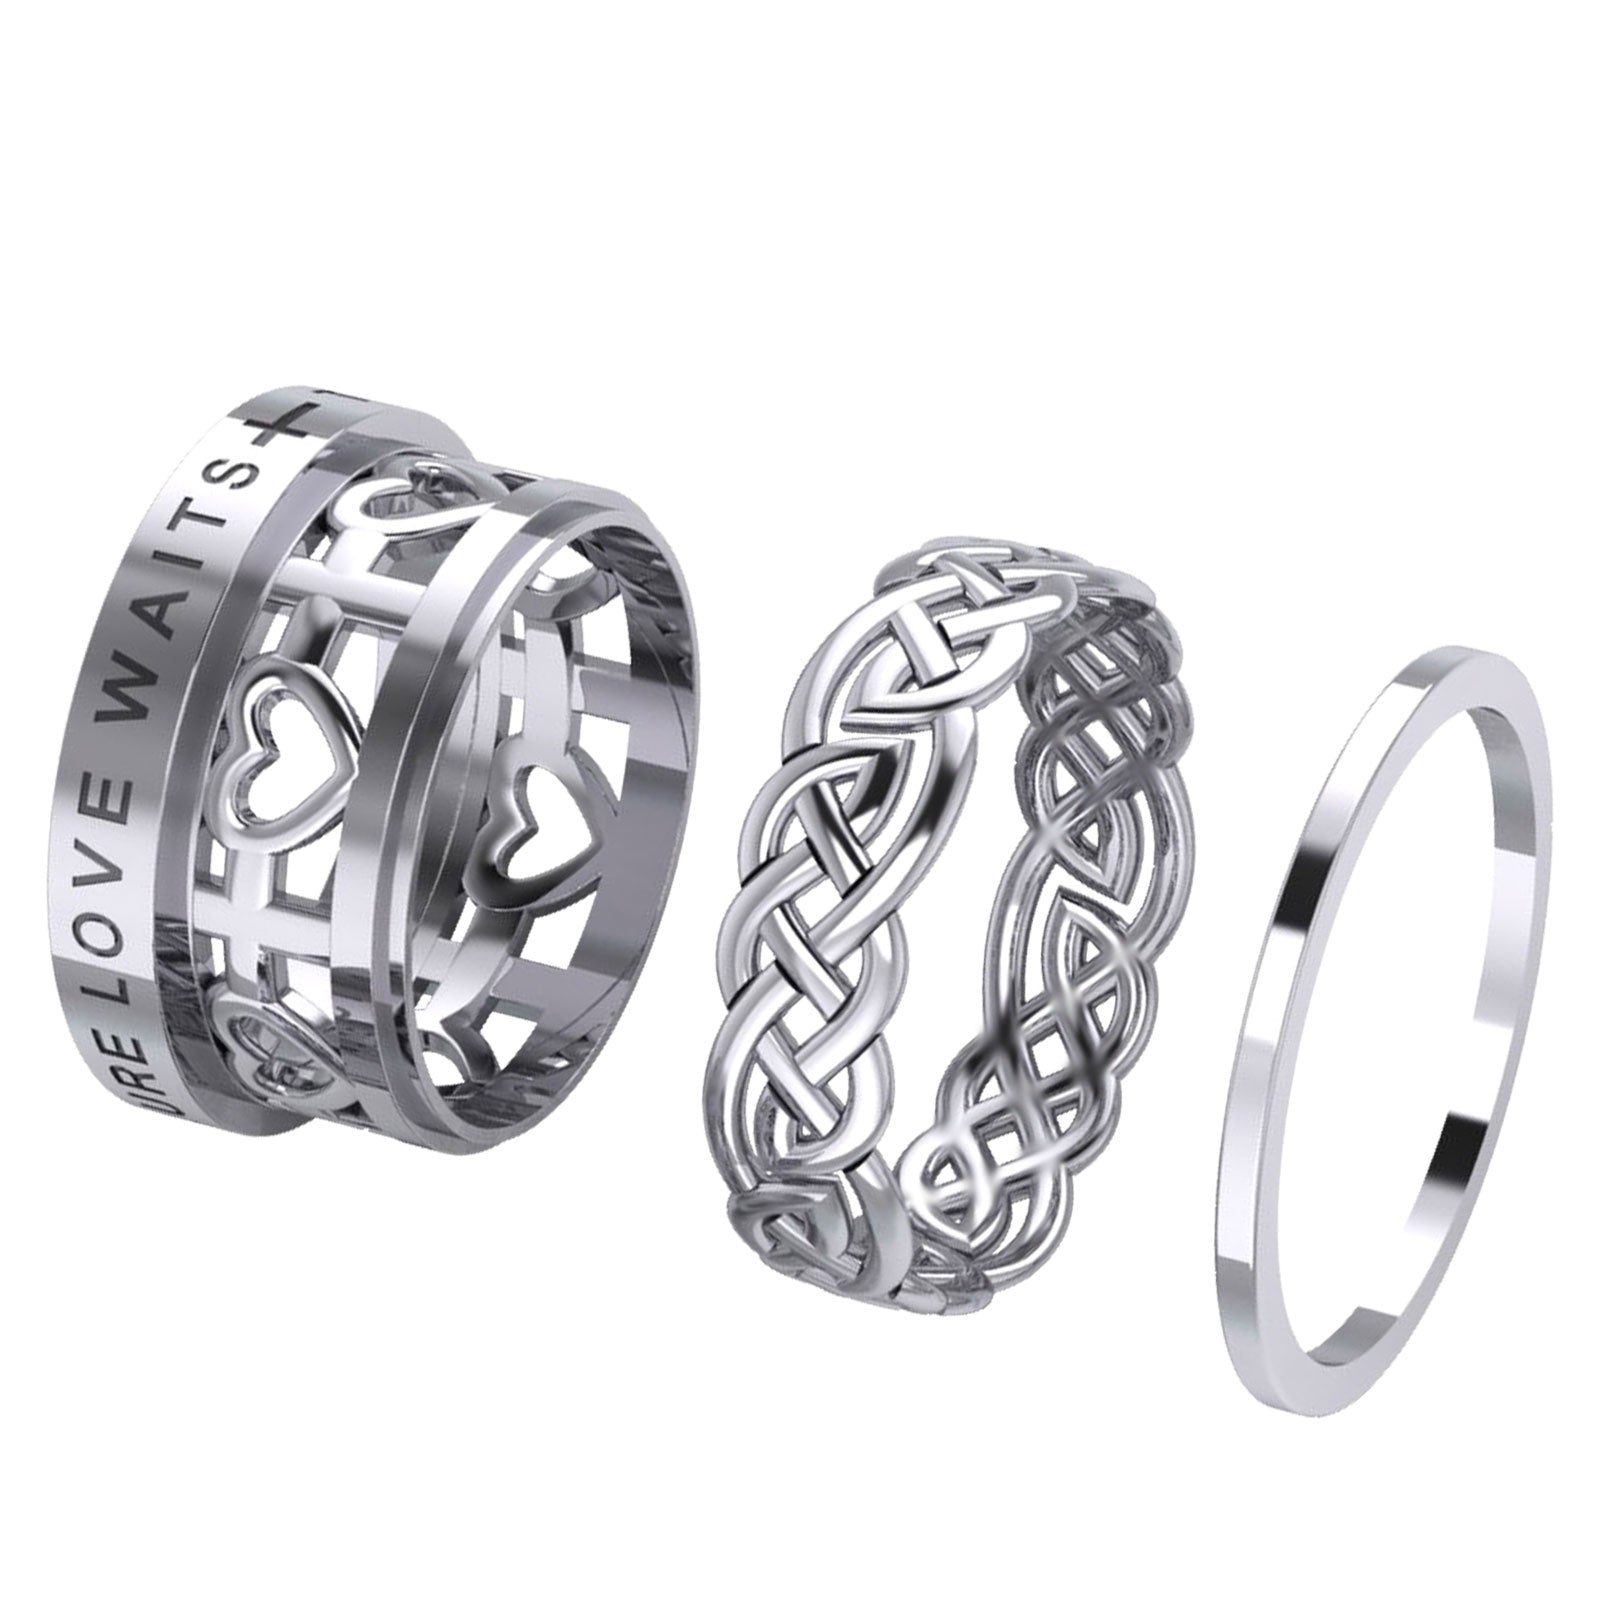 Peter Stone True Love Waits Celtic Silver Spinner Ring TRI2449